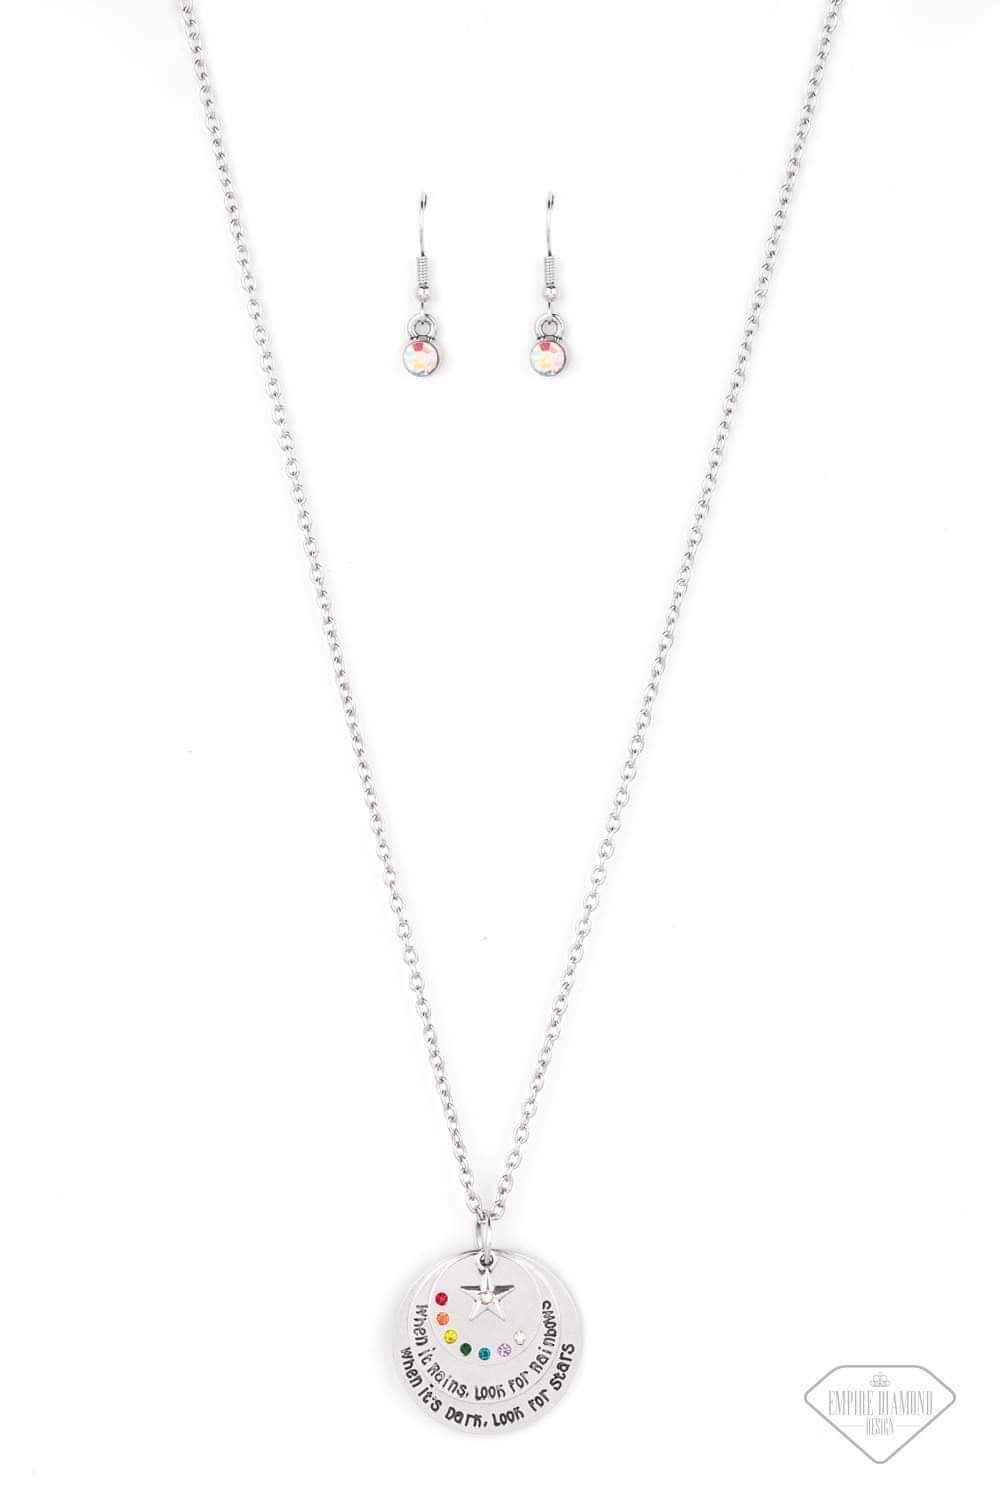 Paparazzi Always Looking Up - Empire Diamond Exclusive Silver Necklace Set